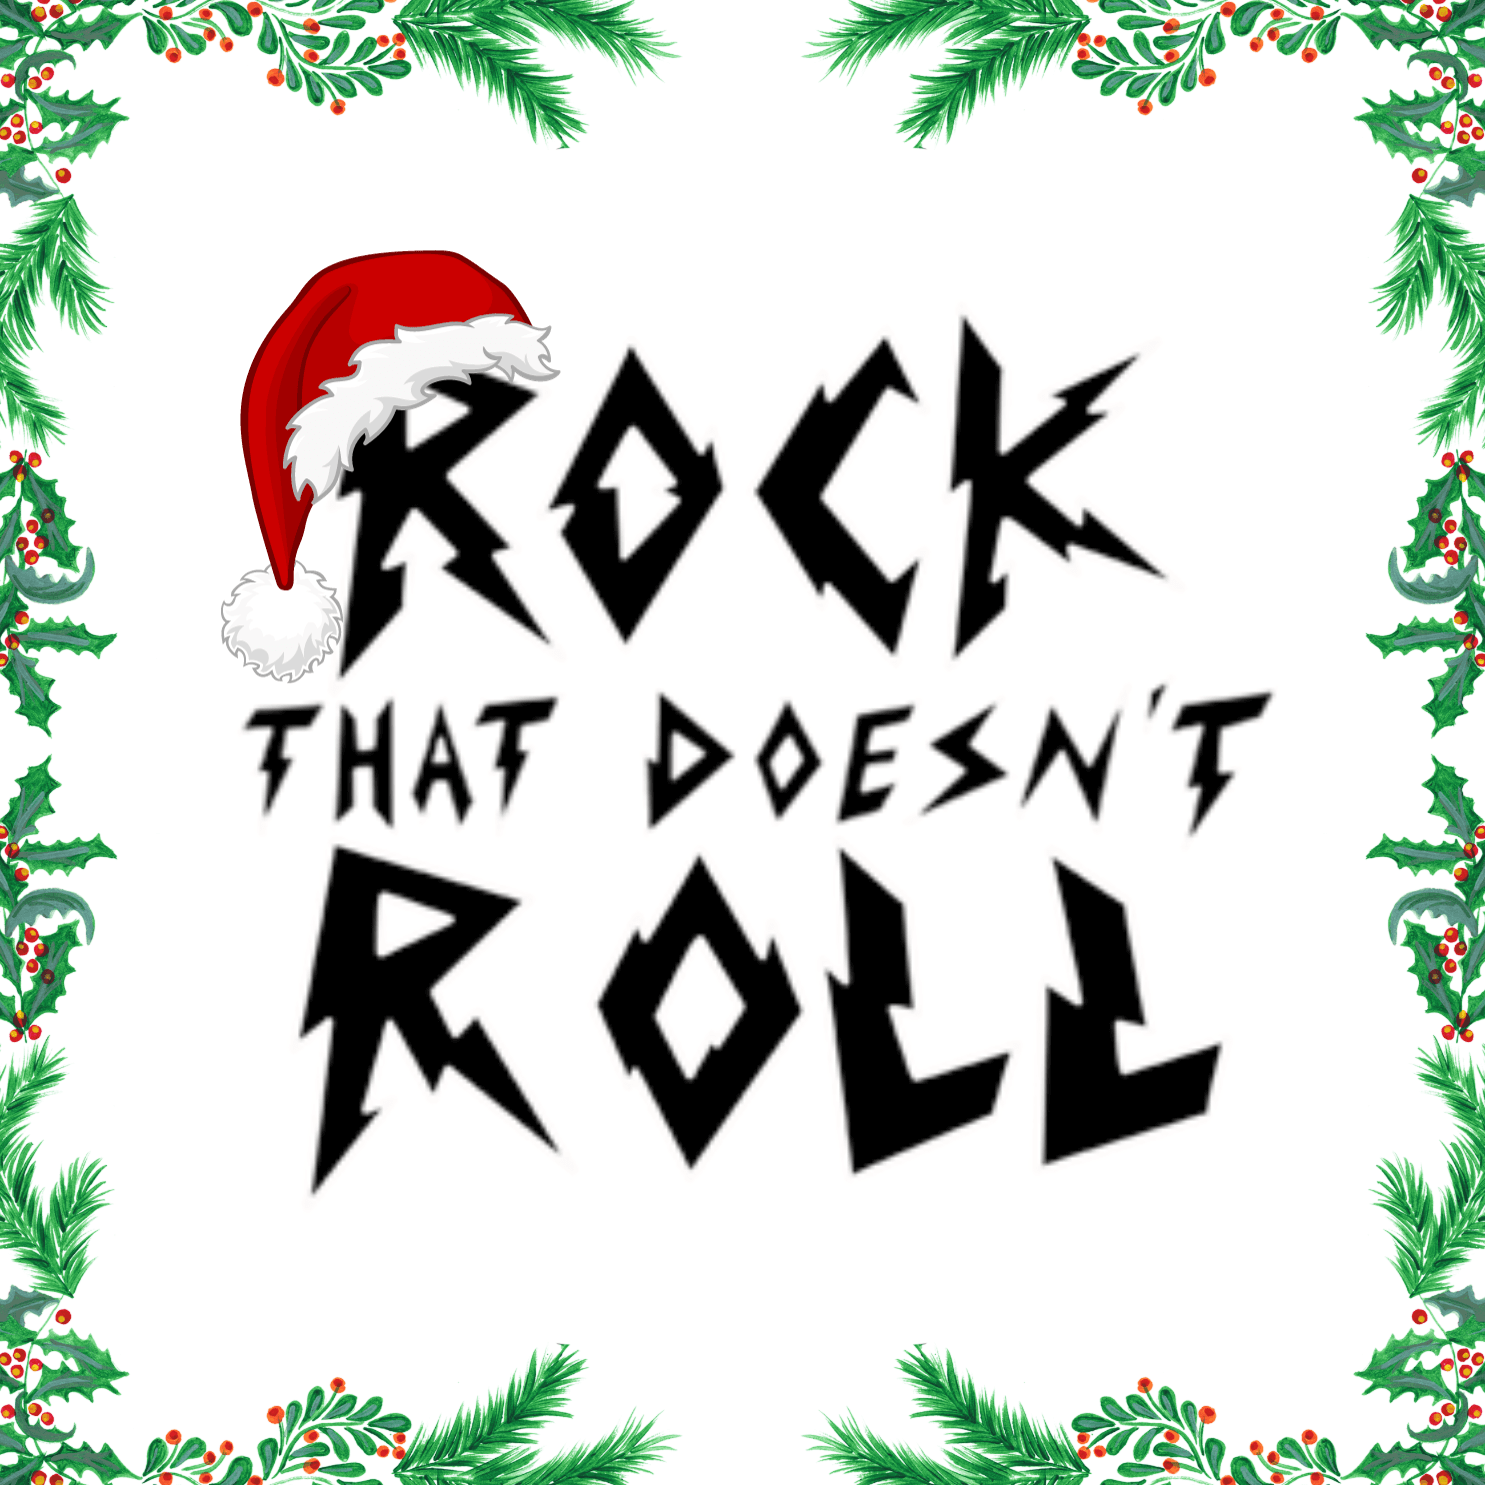 Thumbnail for "It's Christmastime! CCM Christmas Music Awards from Rock That Doesn't Roll".